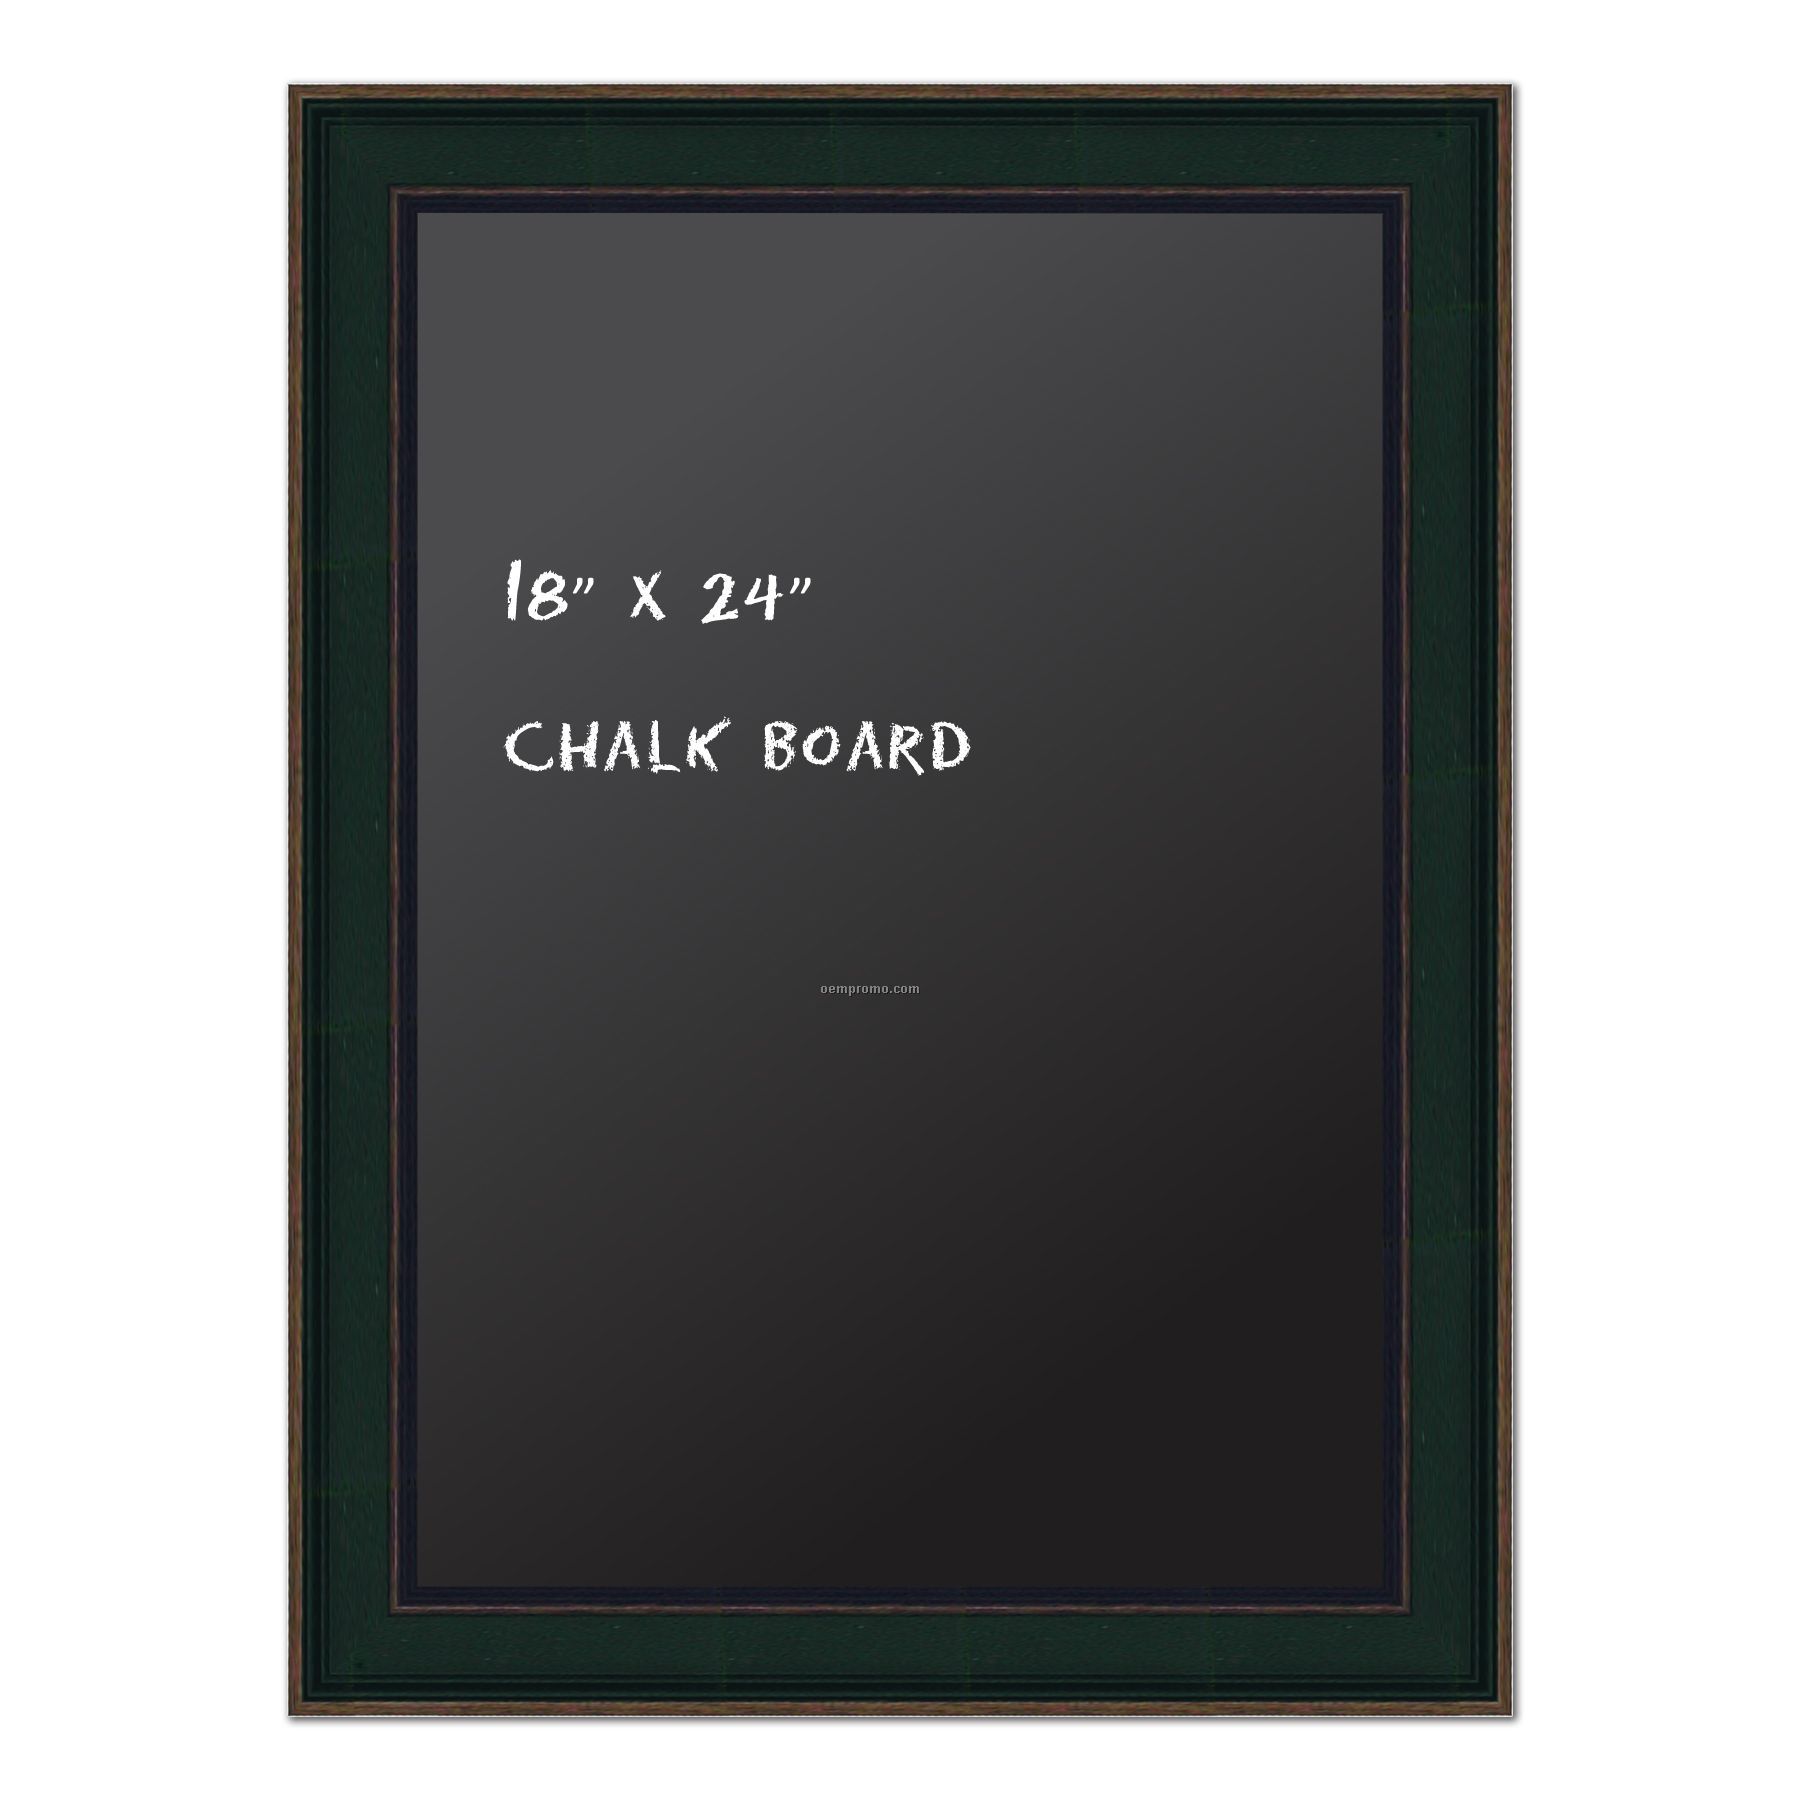 Chalk Board 18" X 24". Real Wood Frame - Country Green Finish.